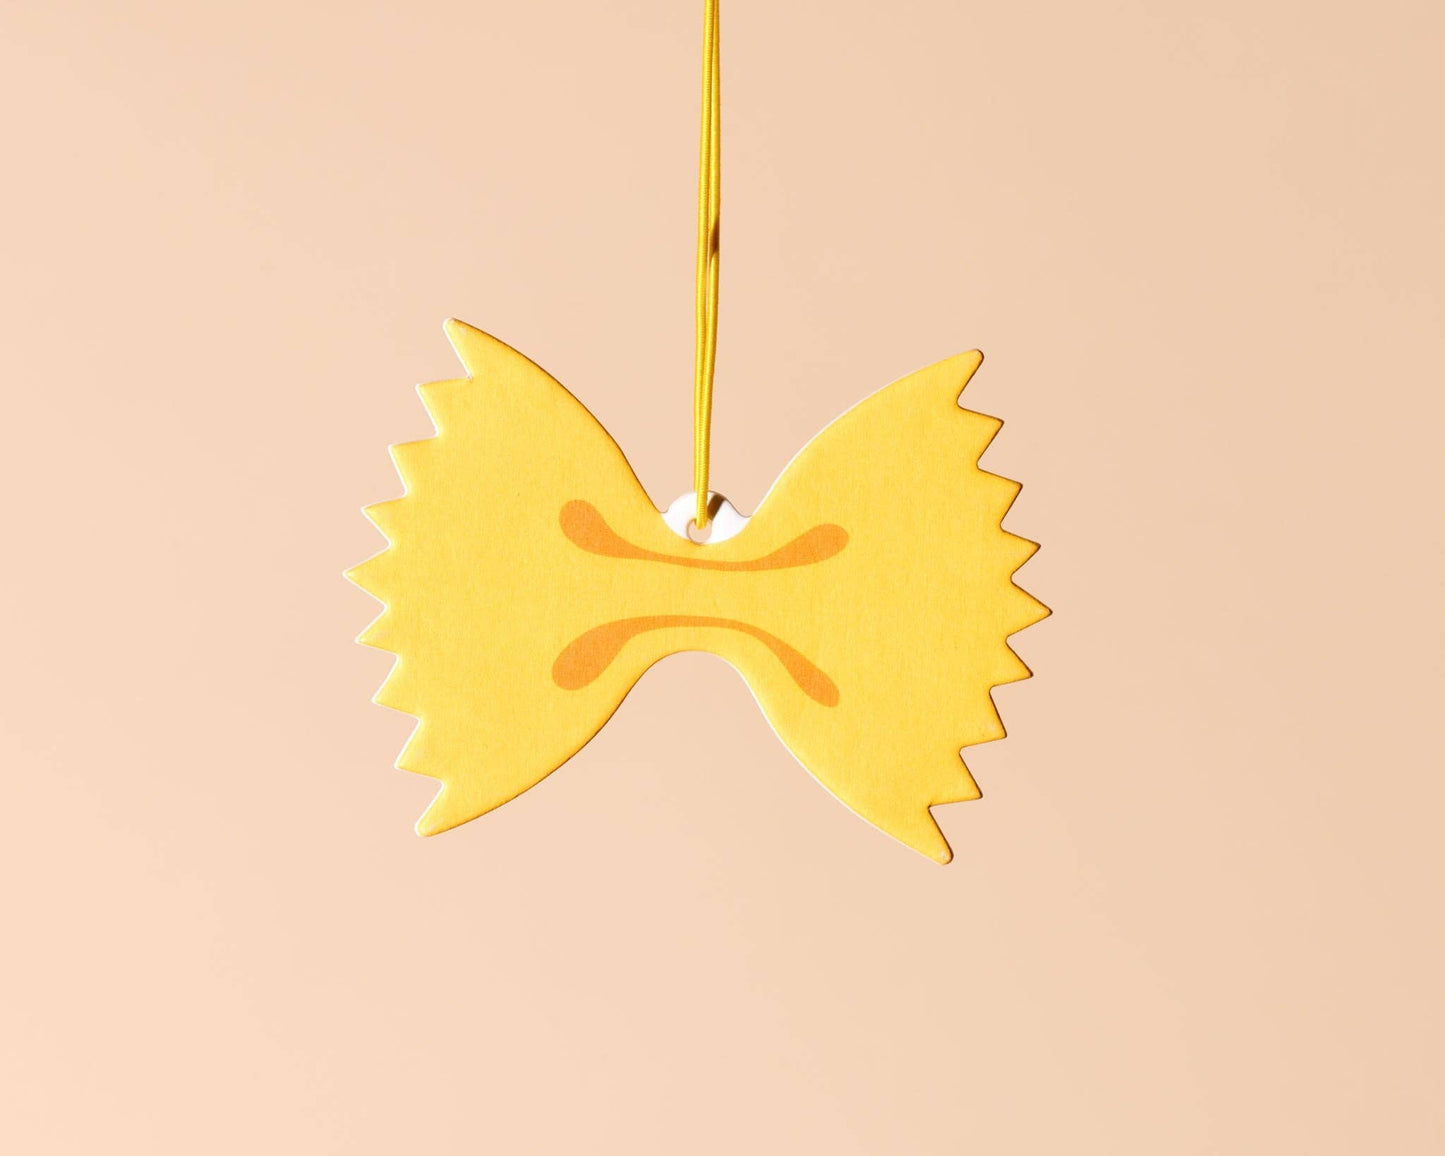 A car air freshener made to look like farfalle (bowtie) pasta. Lemon scented. 